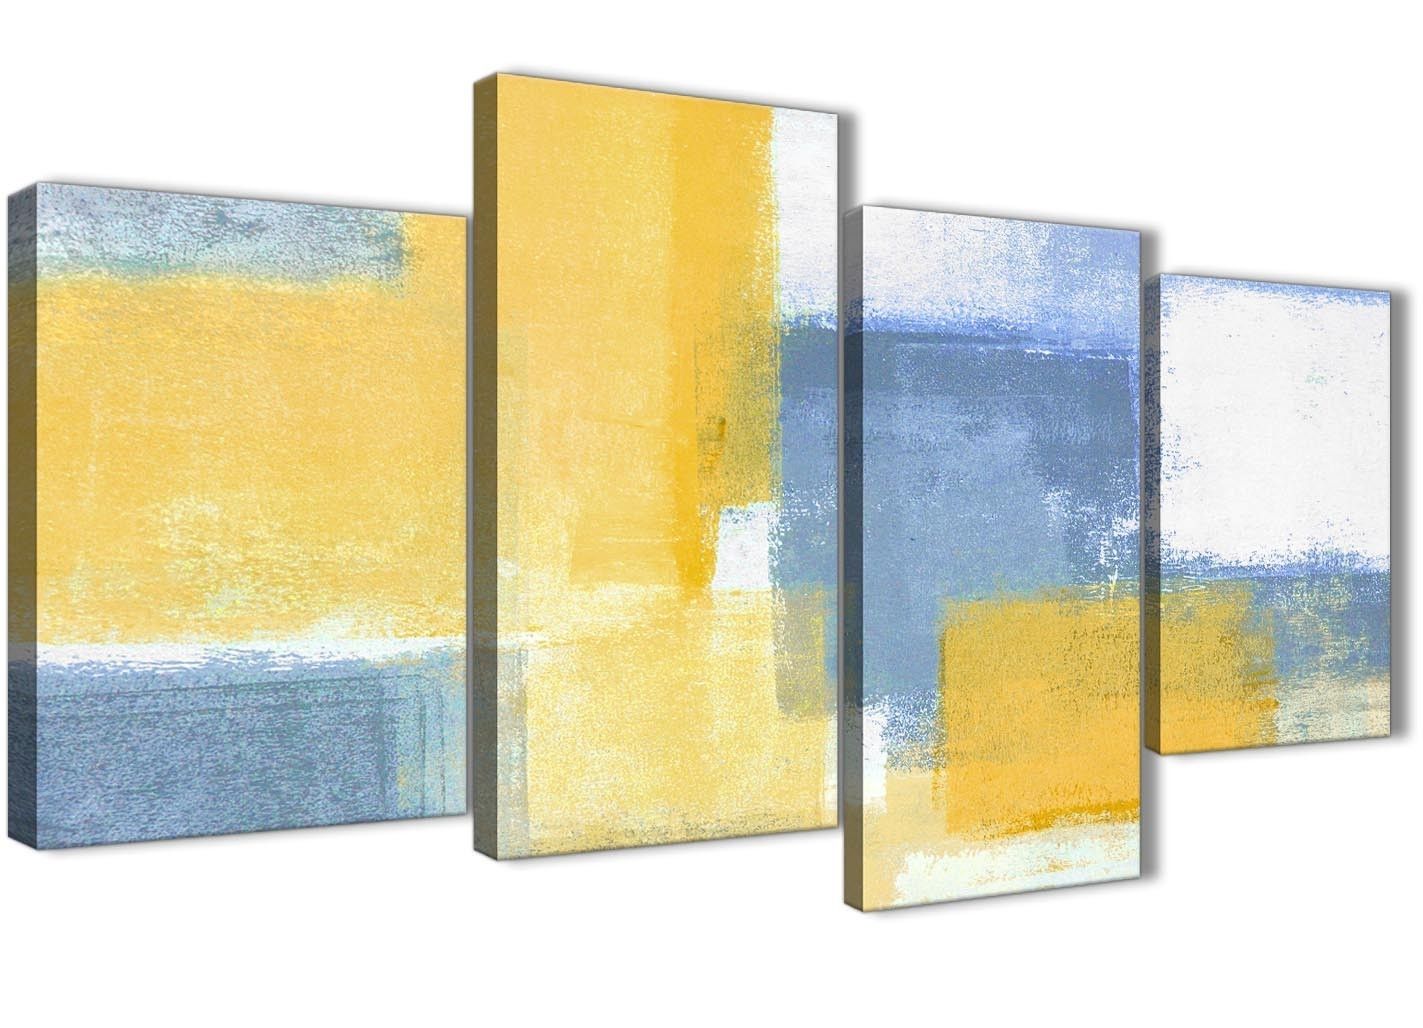 Large Mustard Yellow Blue Abstract Living Room Canvas Pictures Decor Throughout Yellow Wall Art (View 14 of 20)